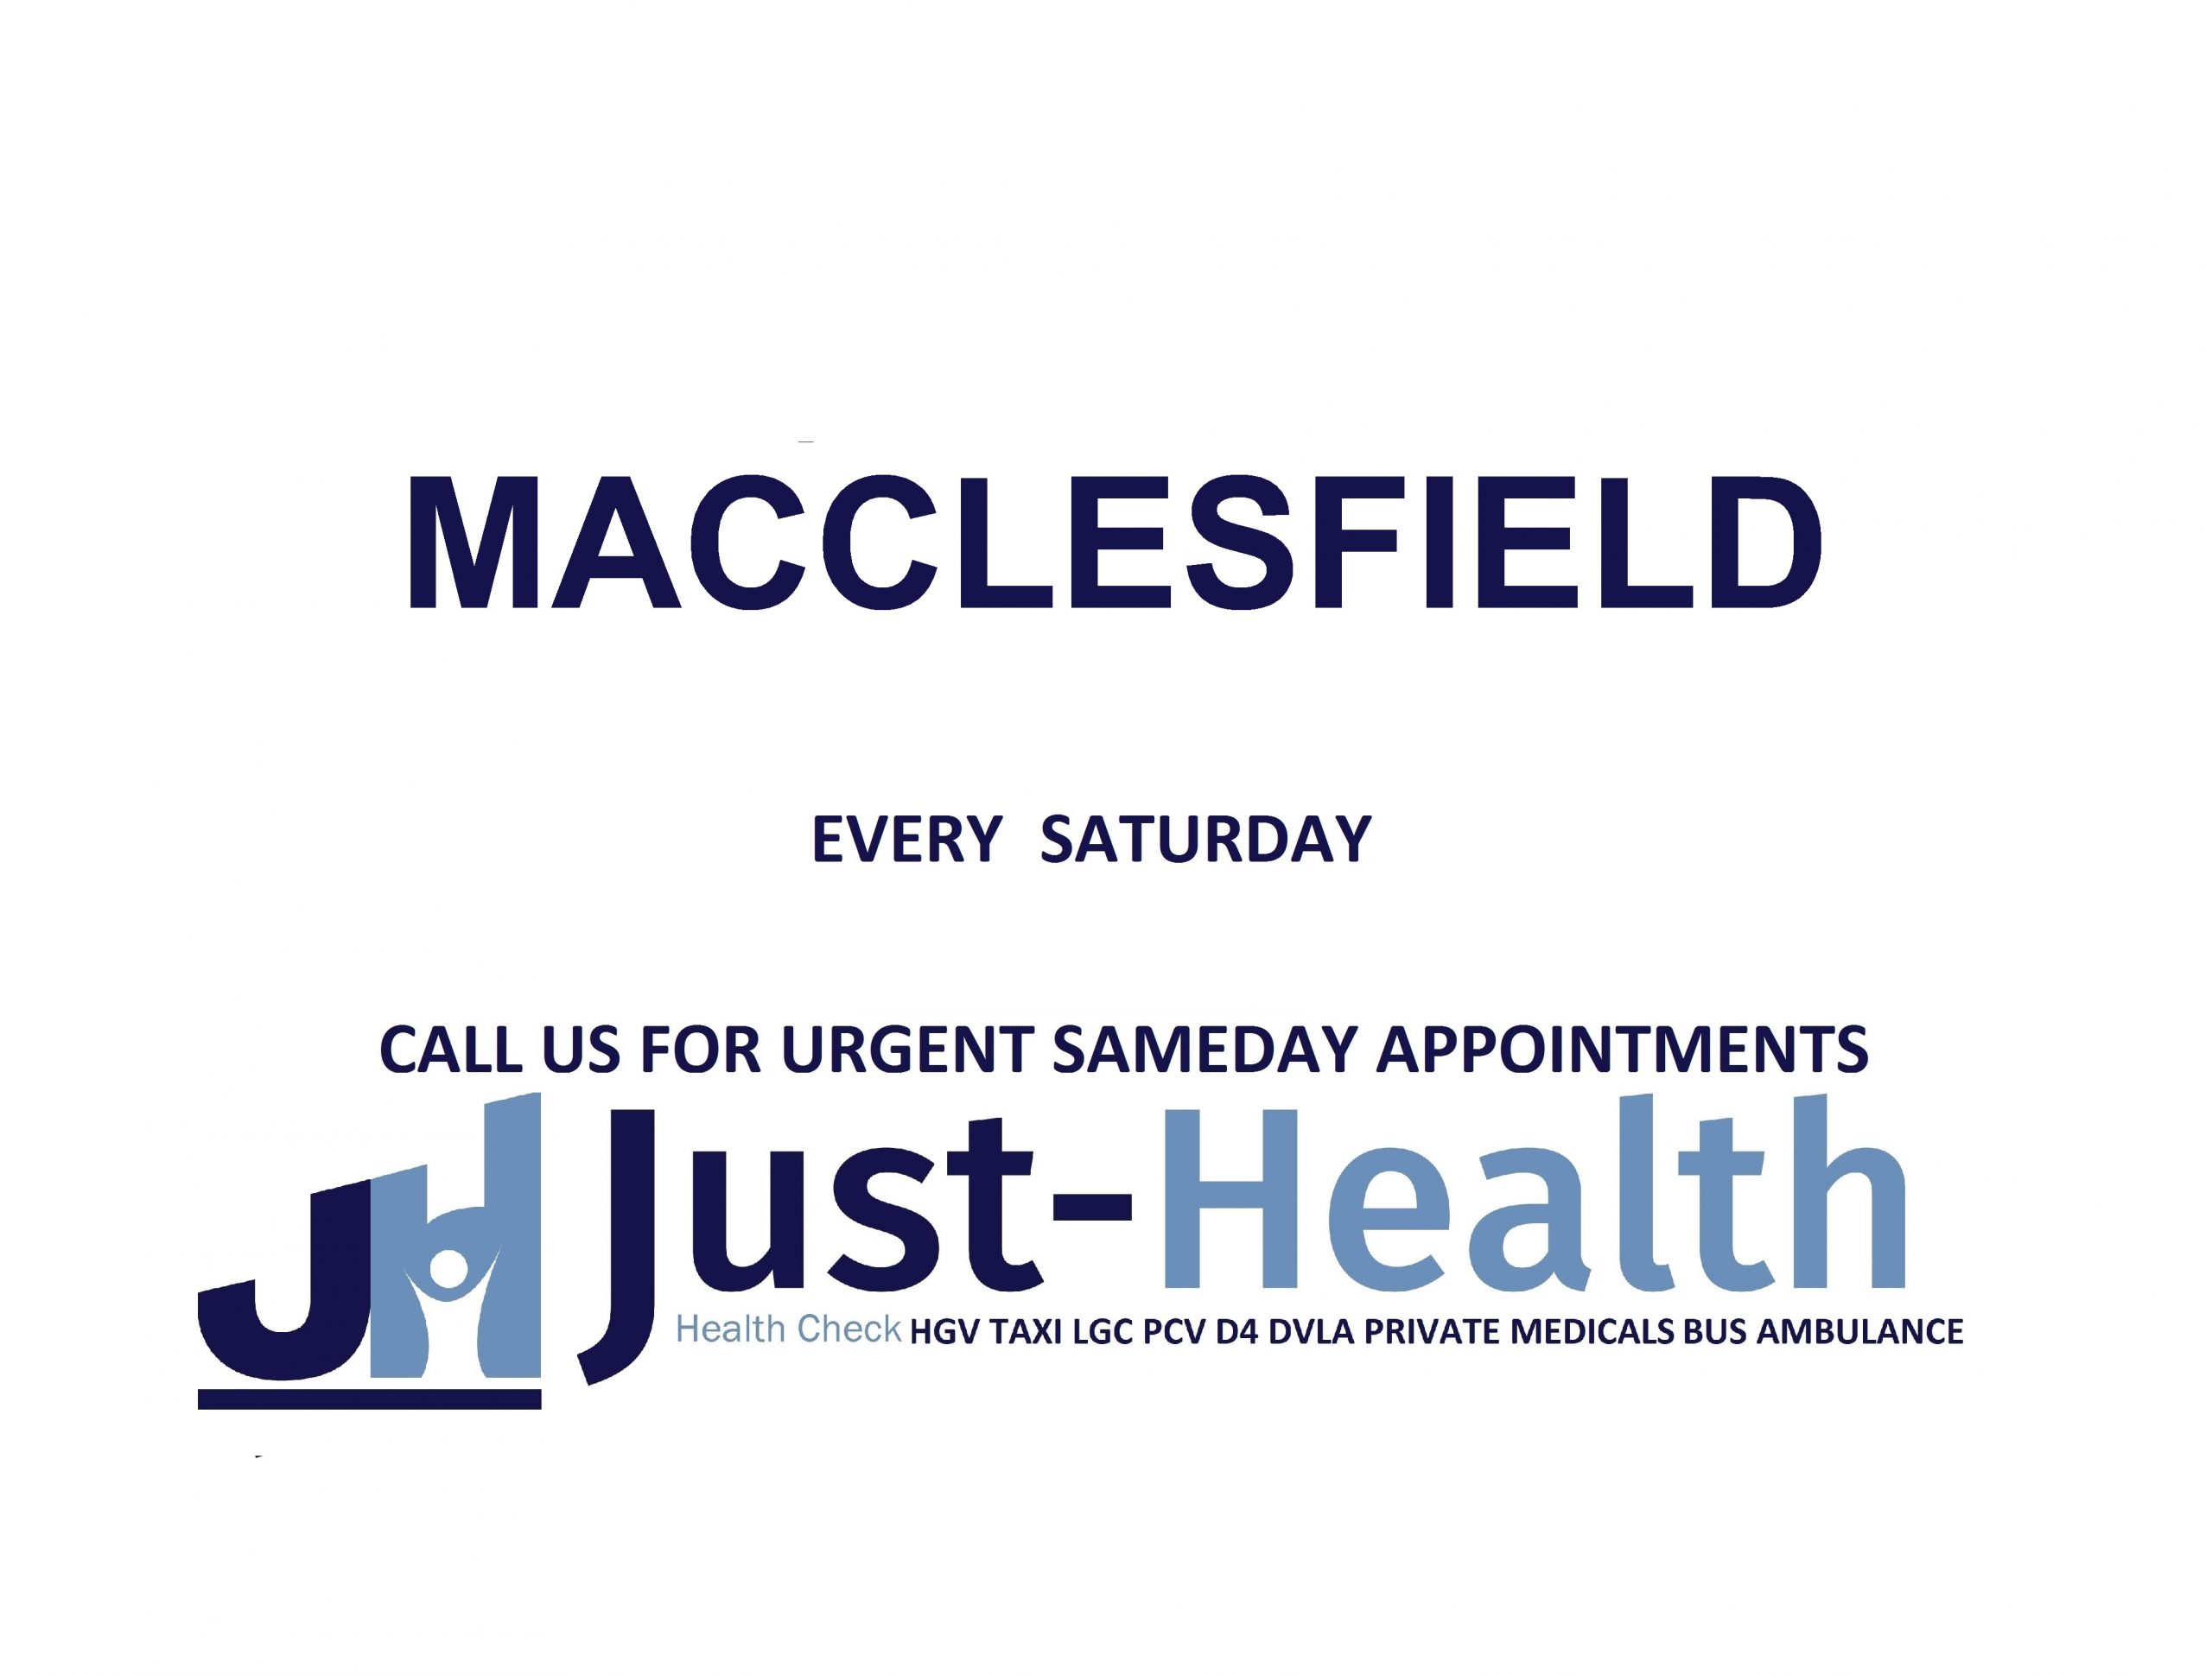 Just Health Lead Medical Driver Medicals & Private Gp services